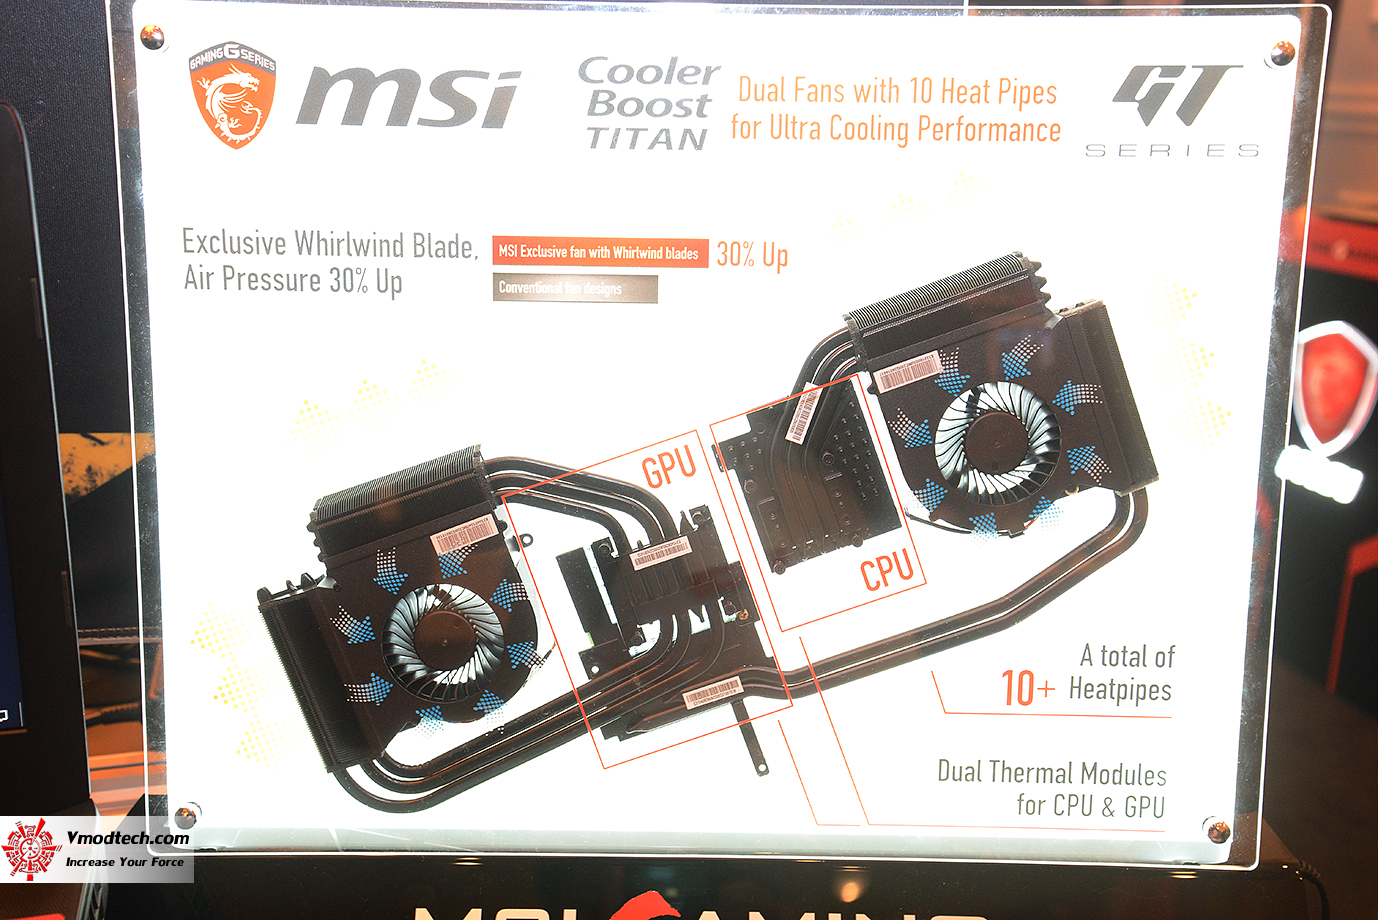 dsc 1952 MSI Cooler Boost Titan & MSI Cooler Boost Trinity New feature MSI Review 